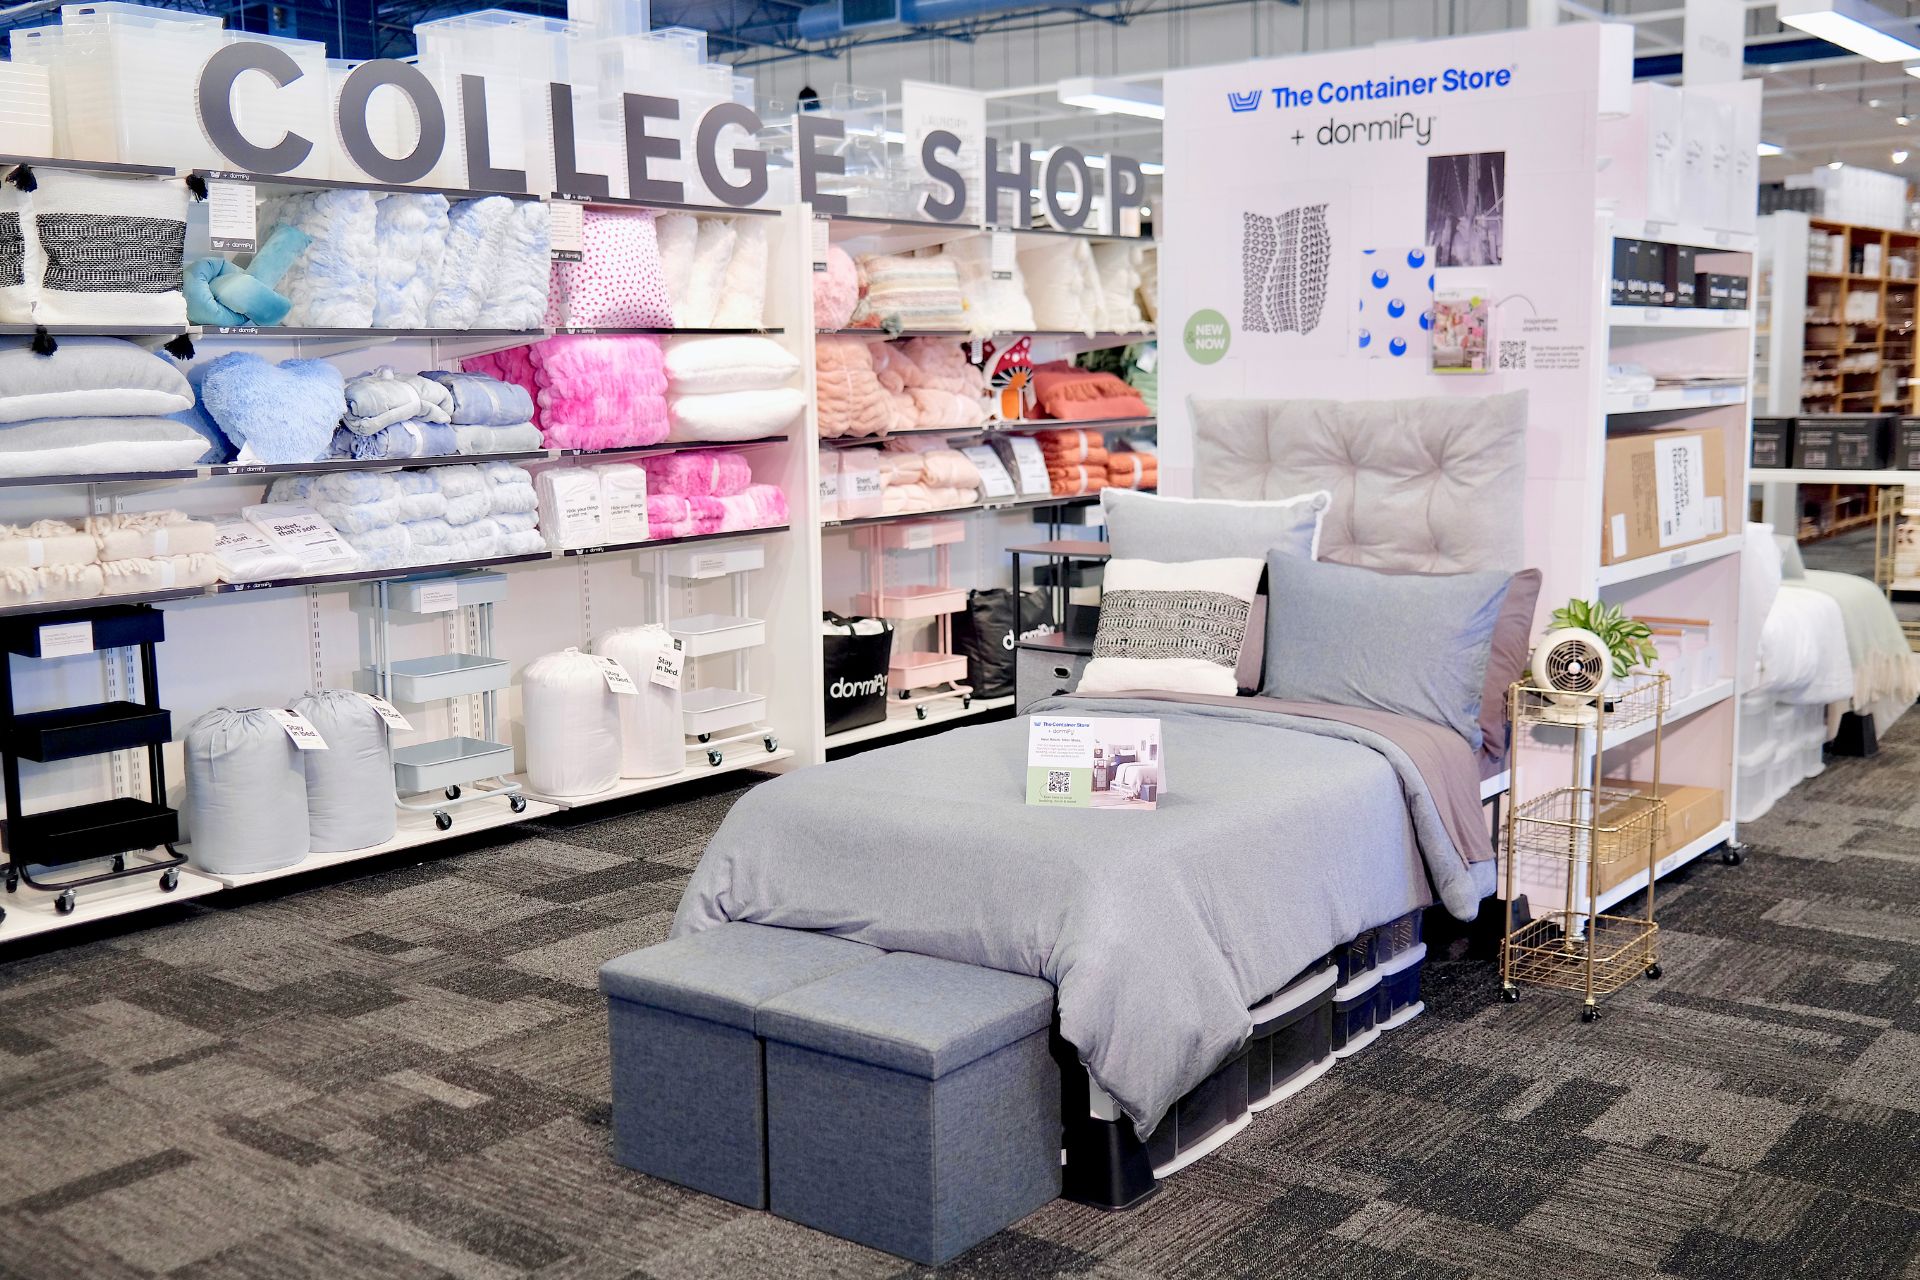 Container Store Goes After $10 Billion Dorm Market With Dormify Shops